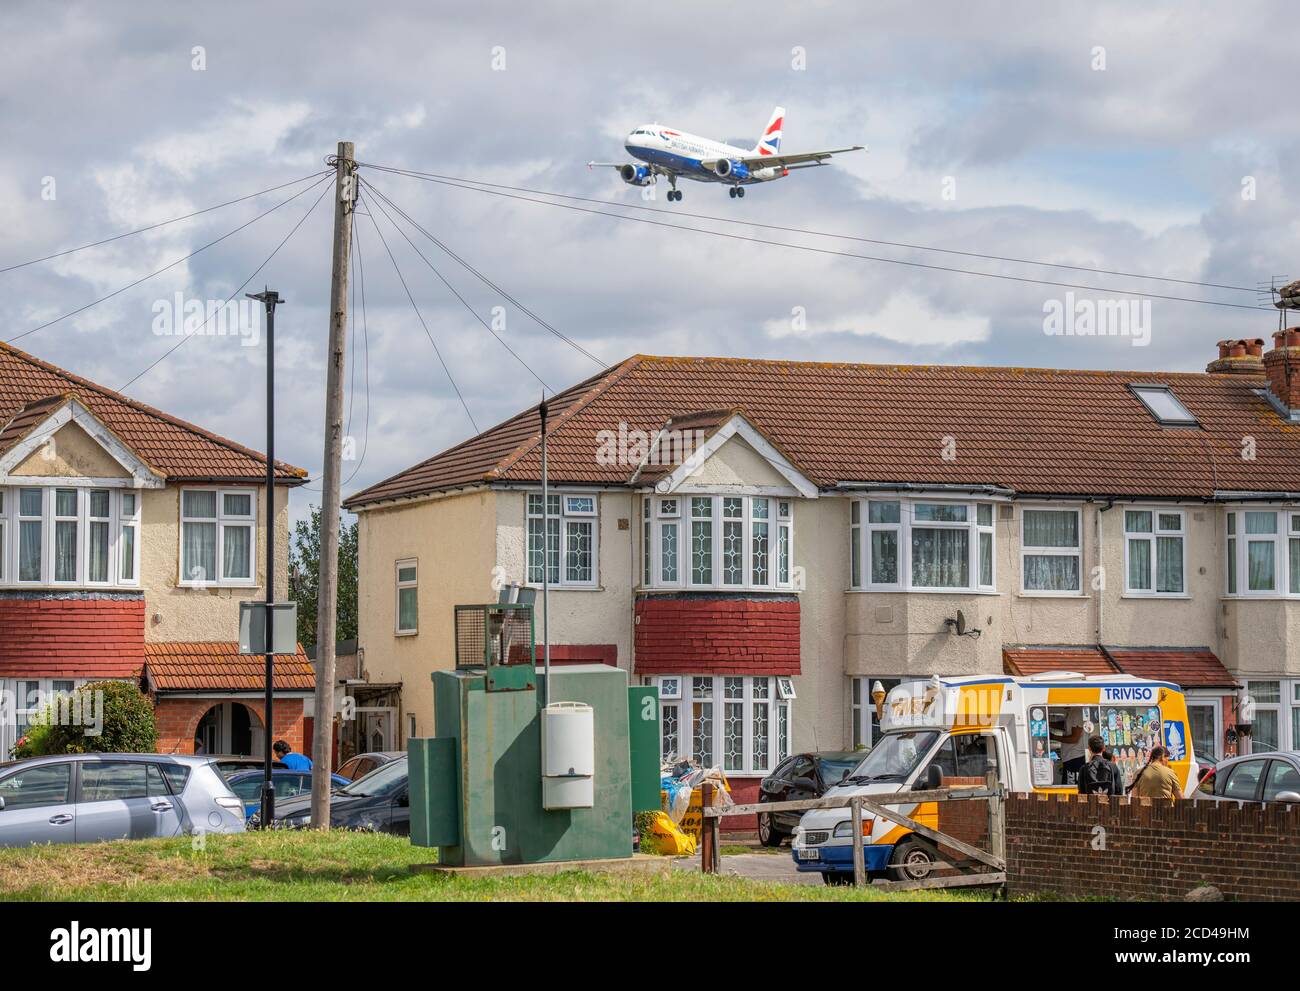 Heathrow Airport, London, UK. 26 August 2020. British Airways flight over Myrtle Avenue on approach to runway 27L at Heathrow in gusting wind, the remnants of Storm Francis. In foreground, an ice cream van visits the avenue. Credit: Malcolm Park/Alamy Live News. Stock Photo